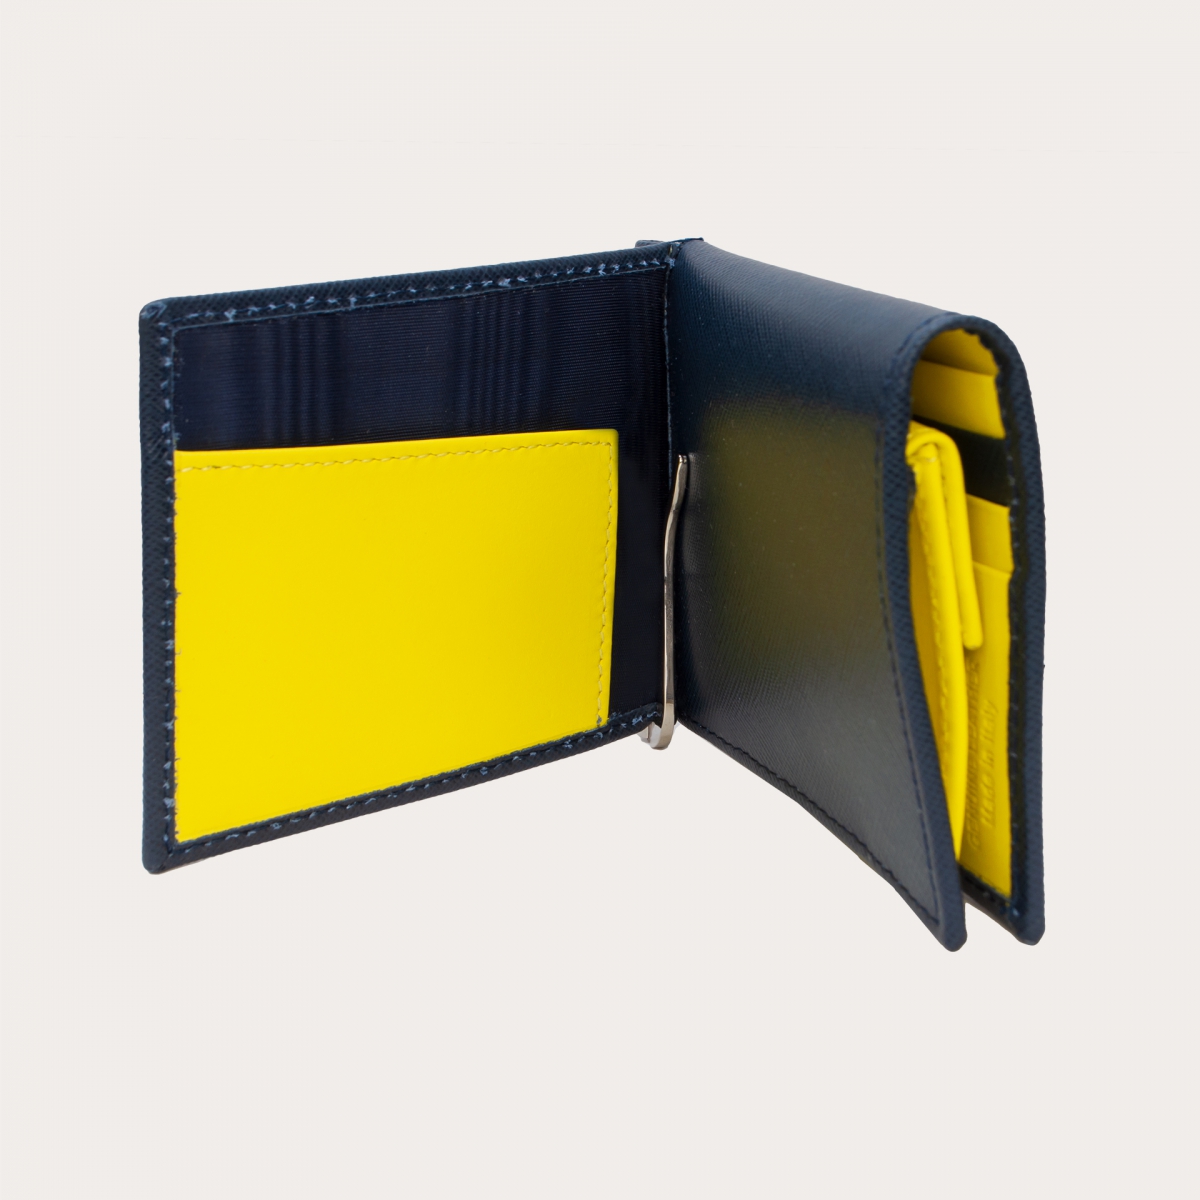 BRUCLE Compact mini wallet in saffiano leather with money clip and coin purse, blue and yellow